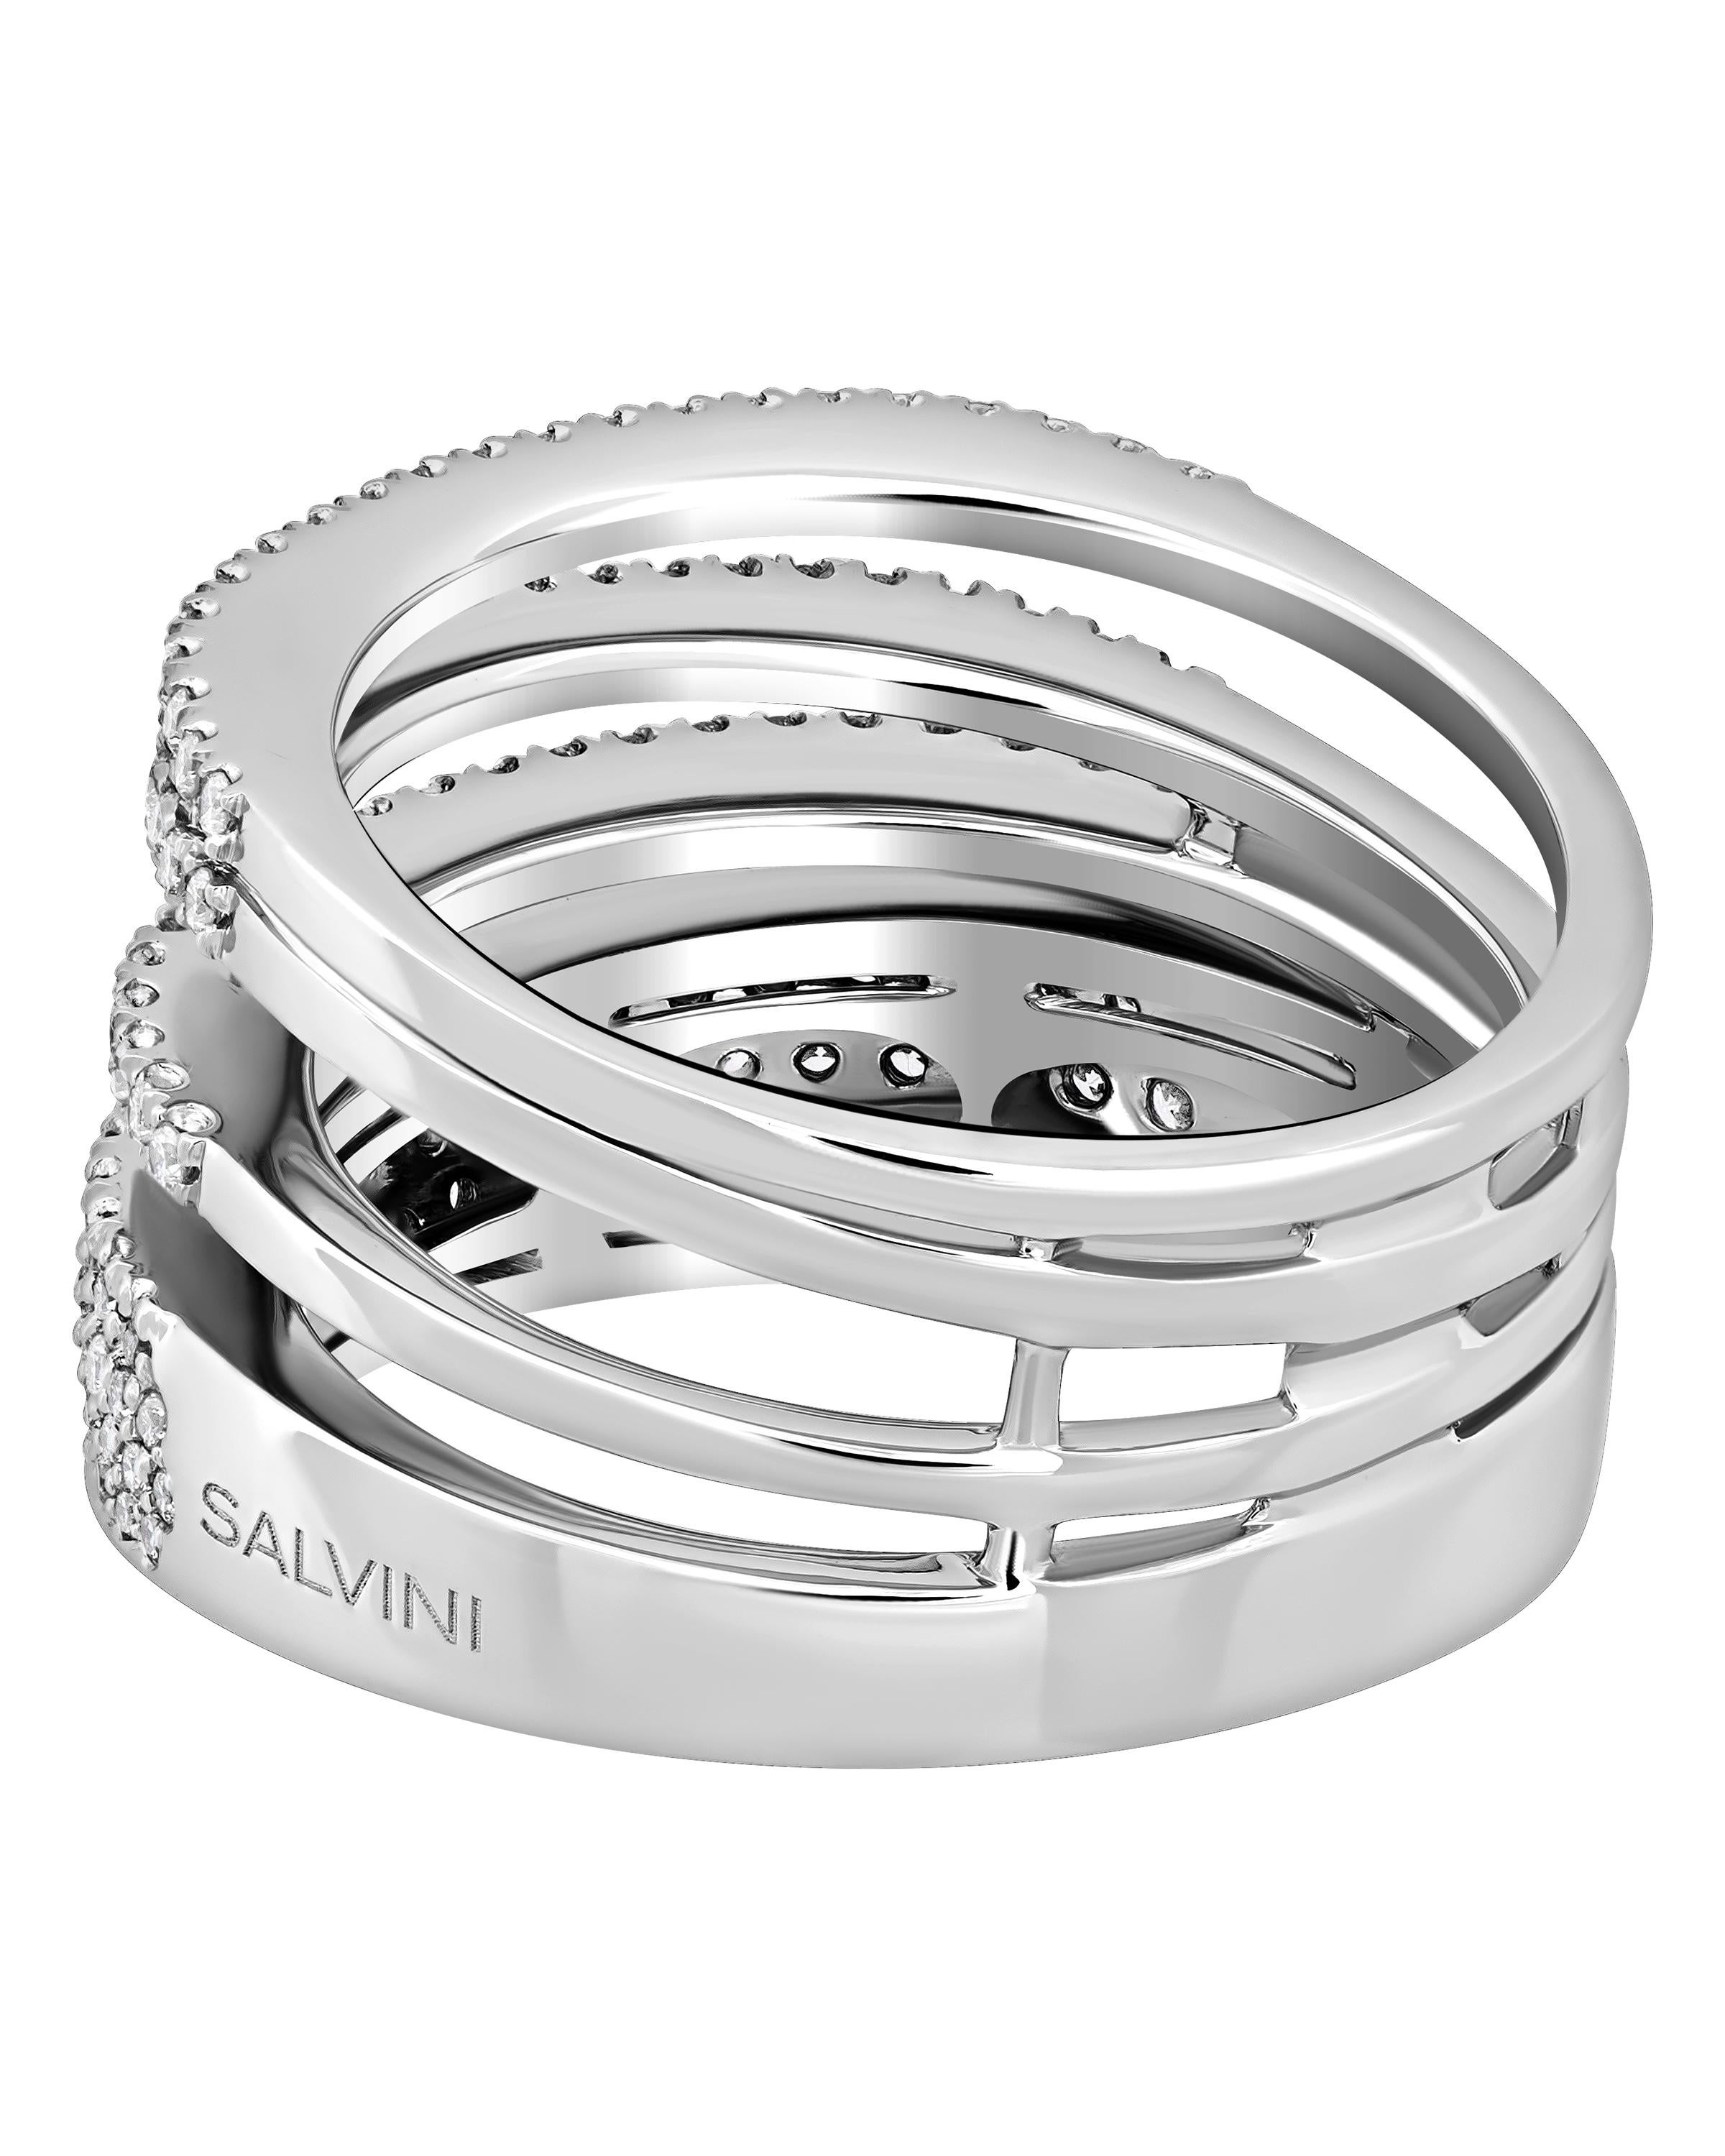 This brilliant Salvini 18K White Gold Puzzle Ring features four white gold bands adorned with diamond 0.80ct. tw. The ring size is 6.75. The band width is 9.2mm. The weight is 10.5g. This designer jewelry is shipped with a Salvini Box.
